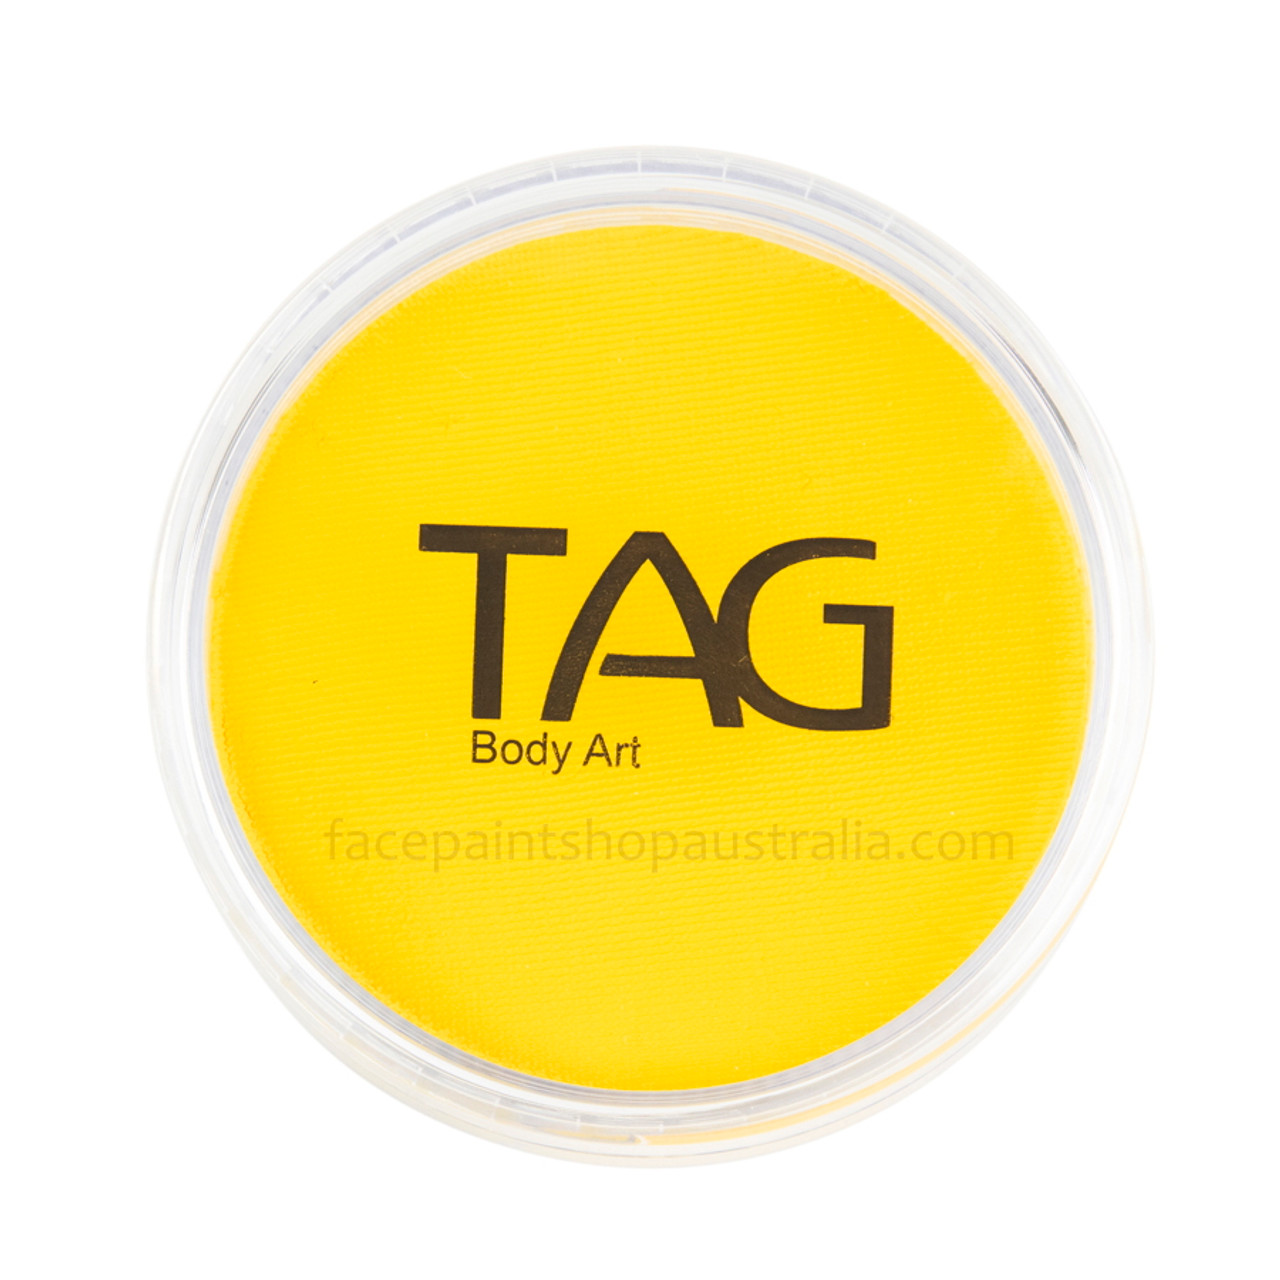 Yellow Face and Body Paint 30g Yellow Face Paint Good Quality Face